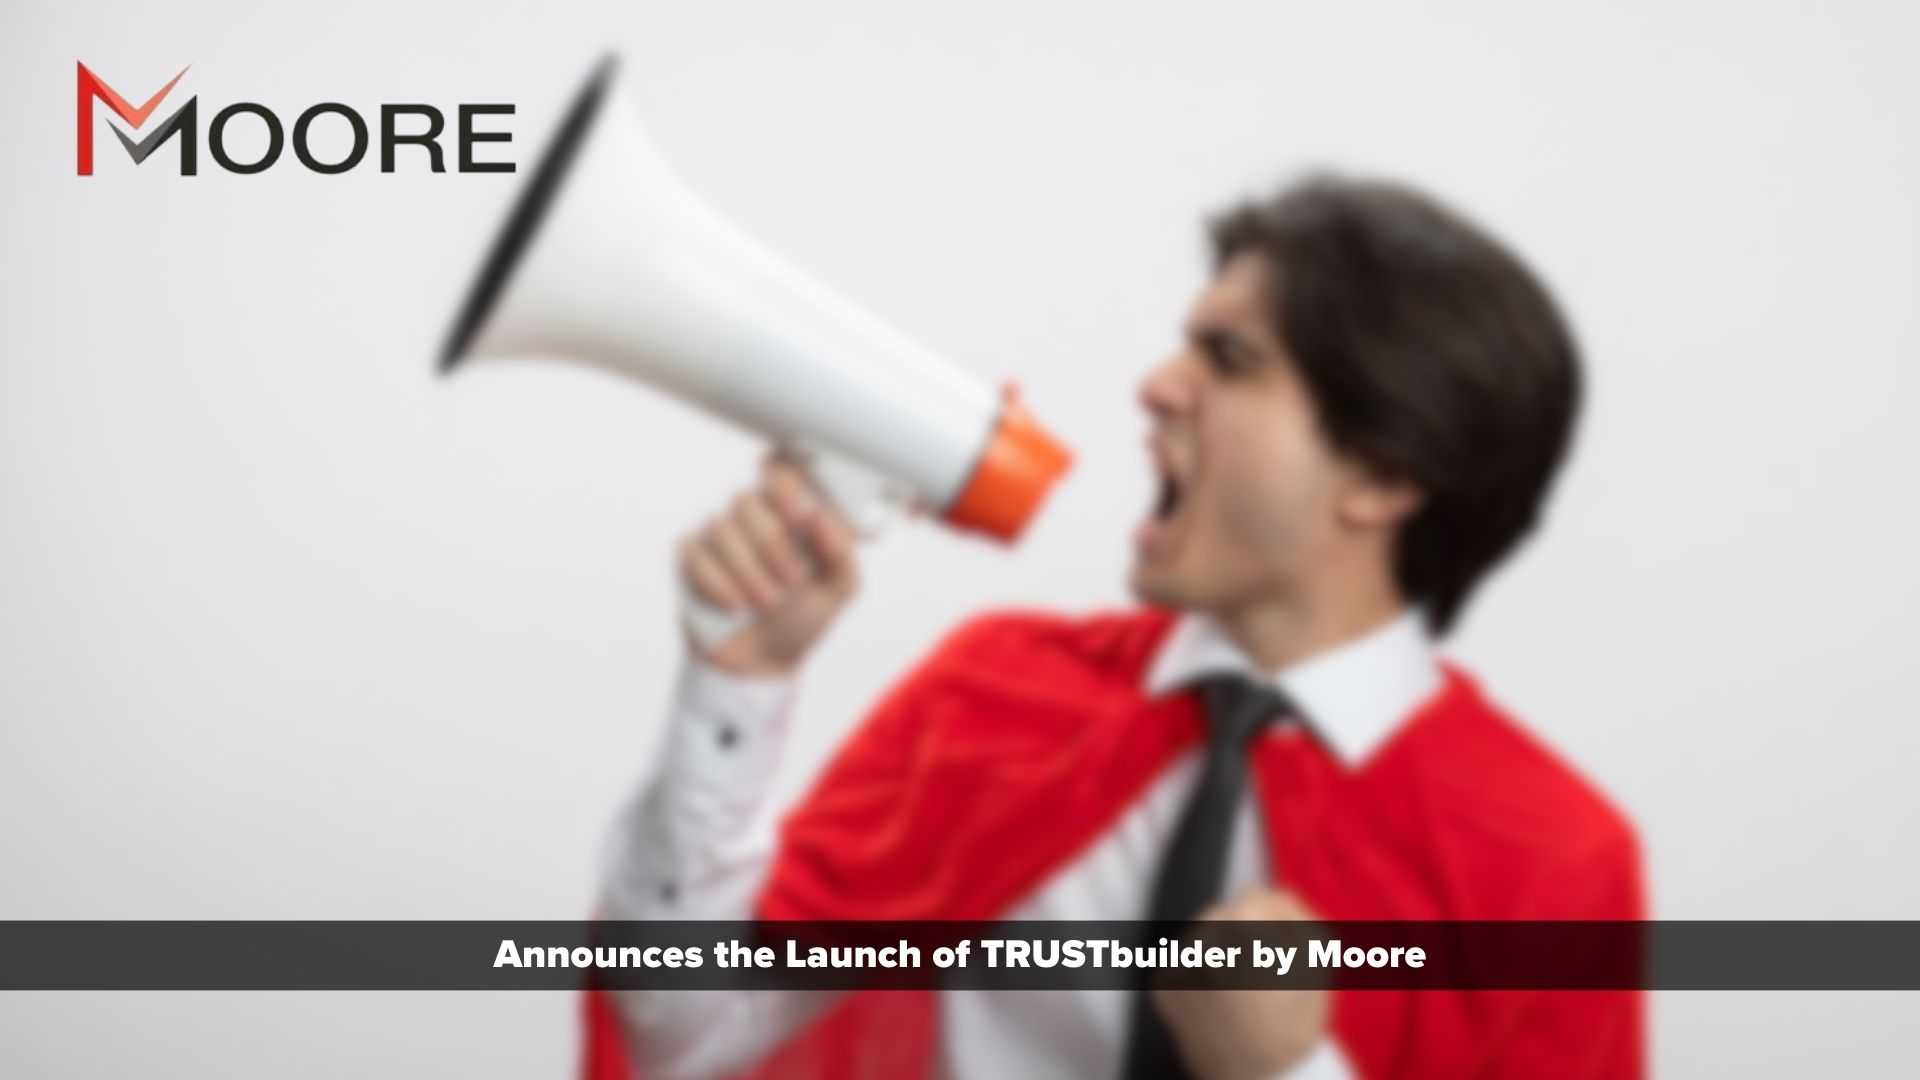 Moore launches TRUSTbuilder, a data-driven approach to build brands donors trust